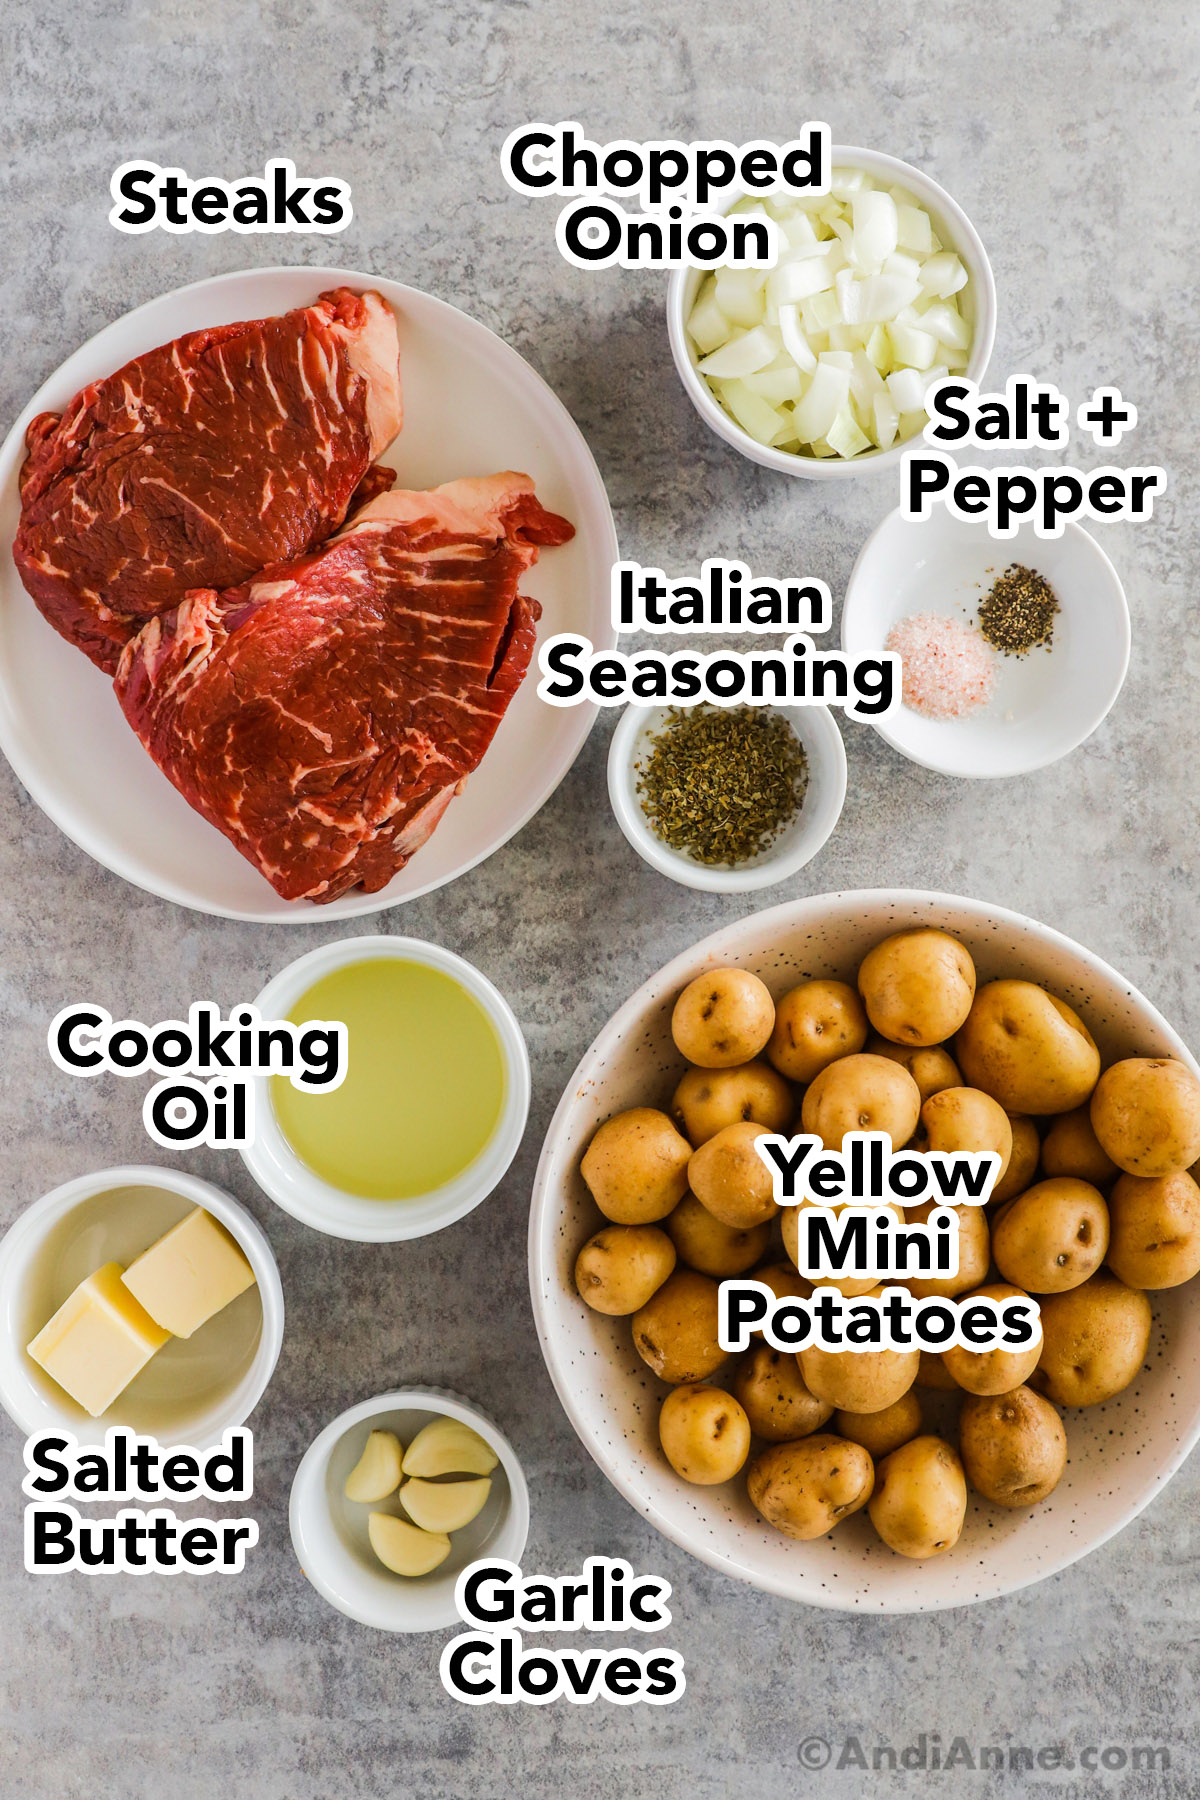 Recipe ingredients in bowls including two raw steaks, mini potatoes, onion, italian seasoning, salt and pepper, cooking oil, butter and garlic.